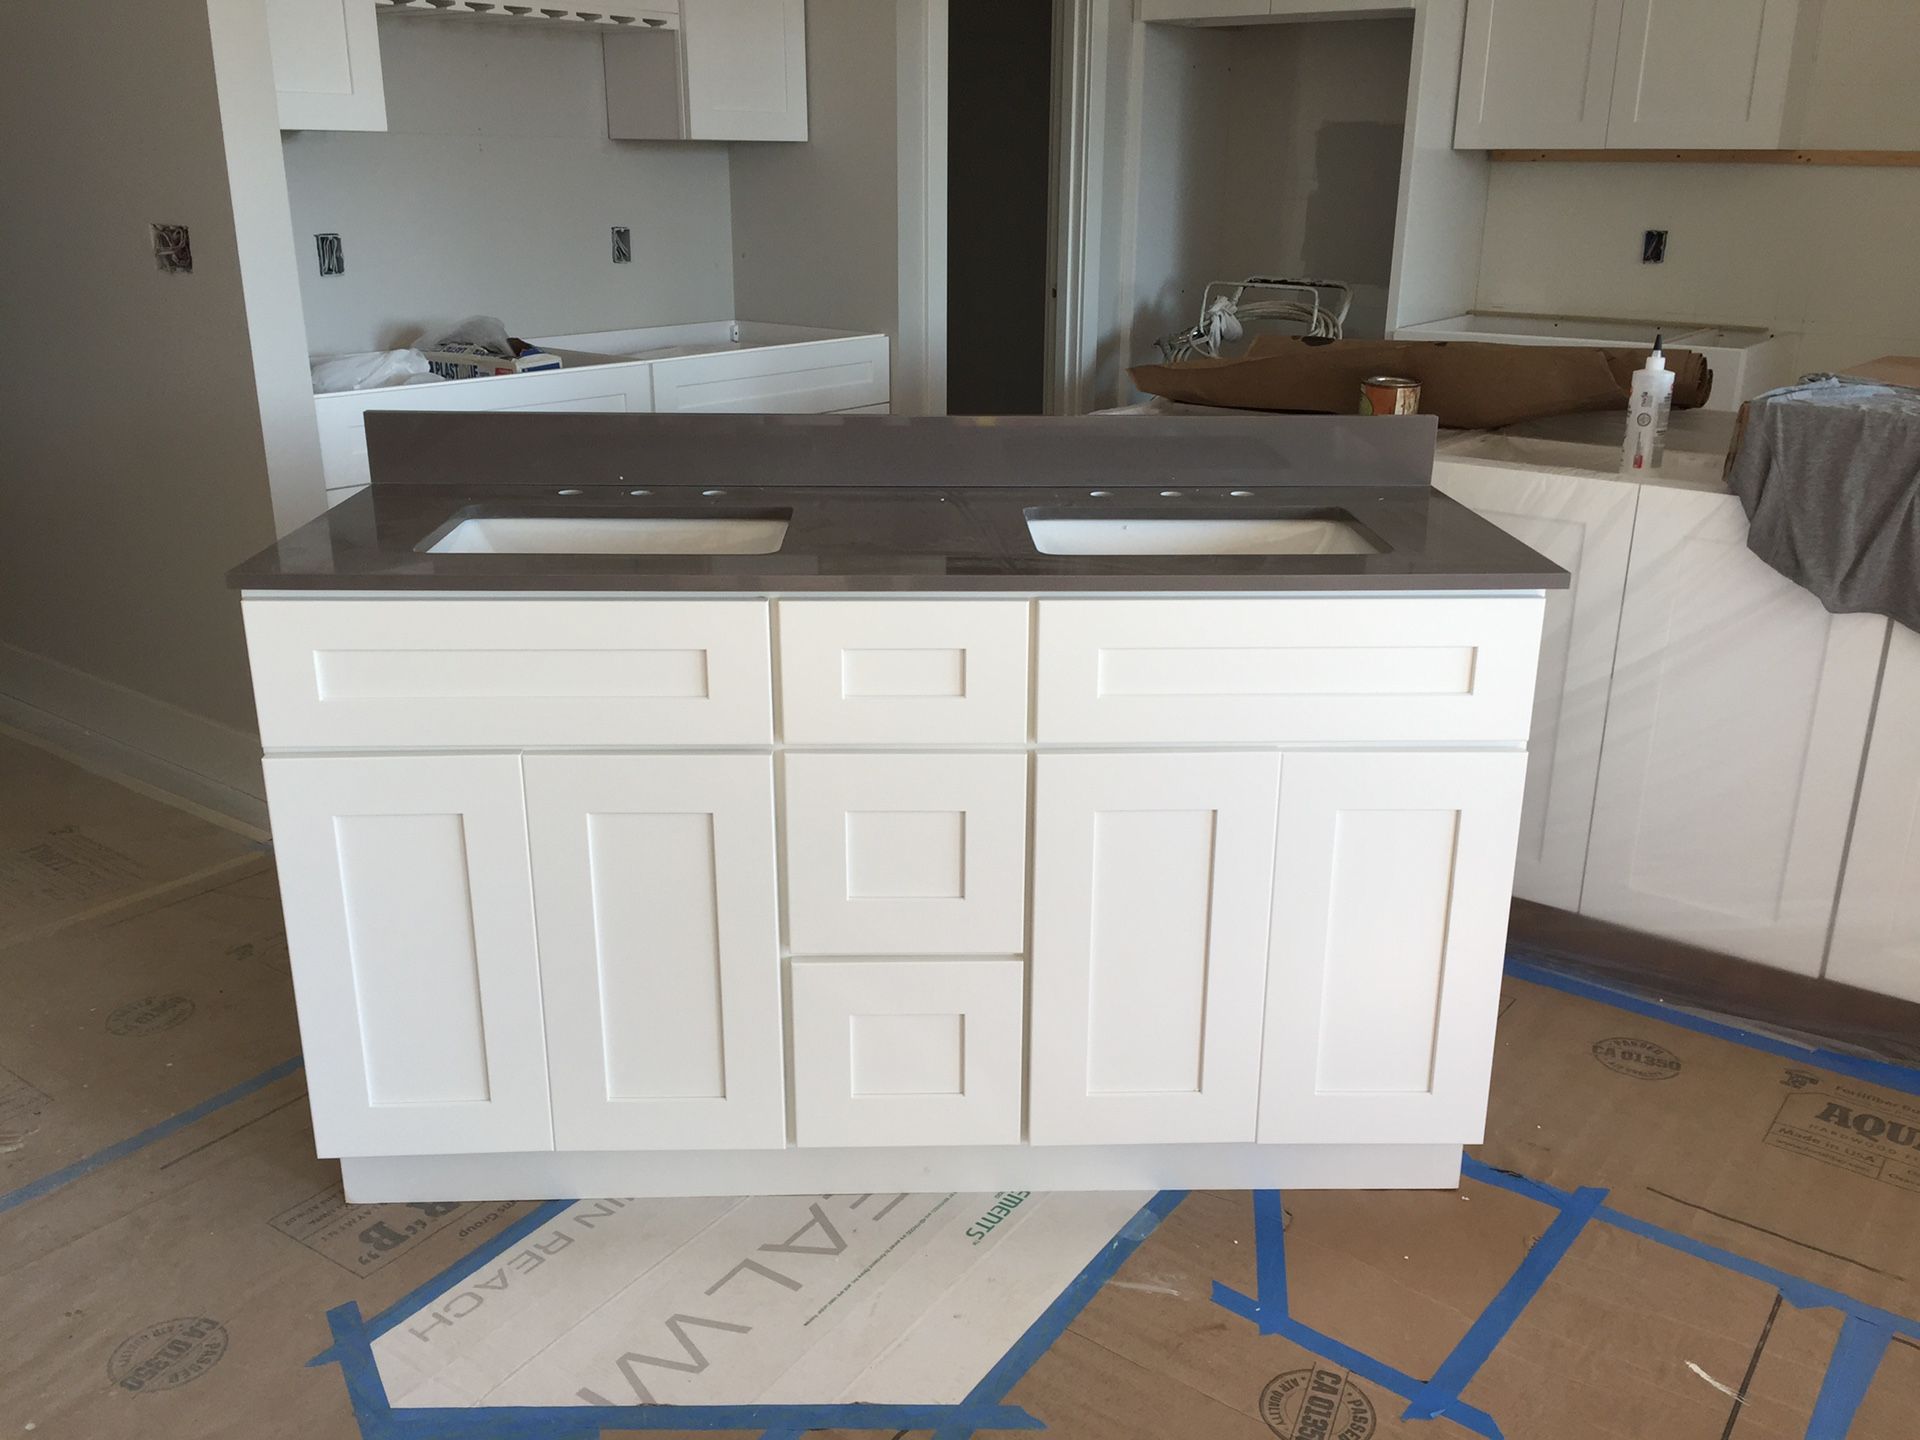 60” double sink vanity cabinet and quartz counter